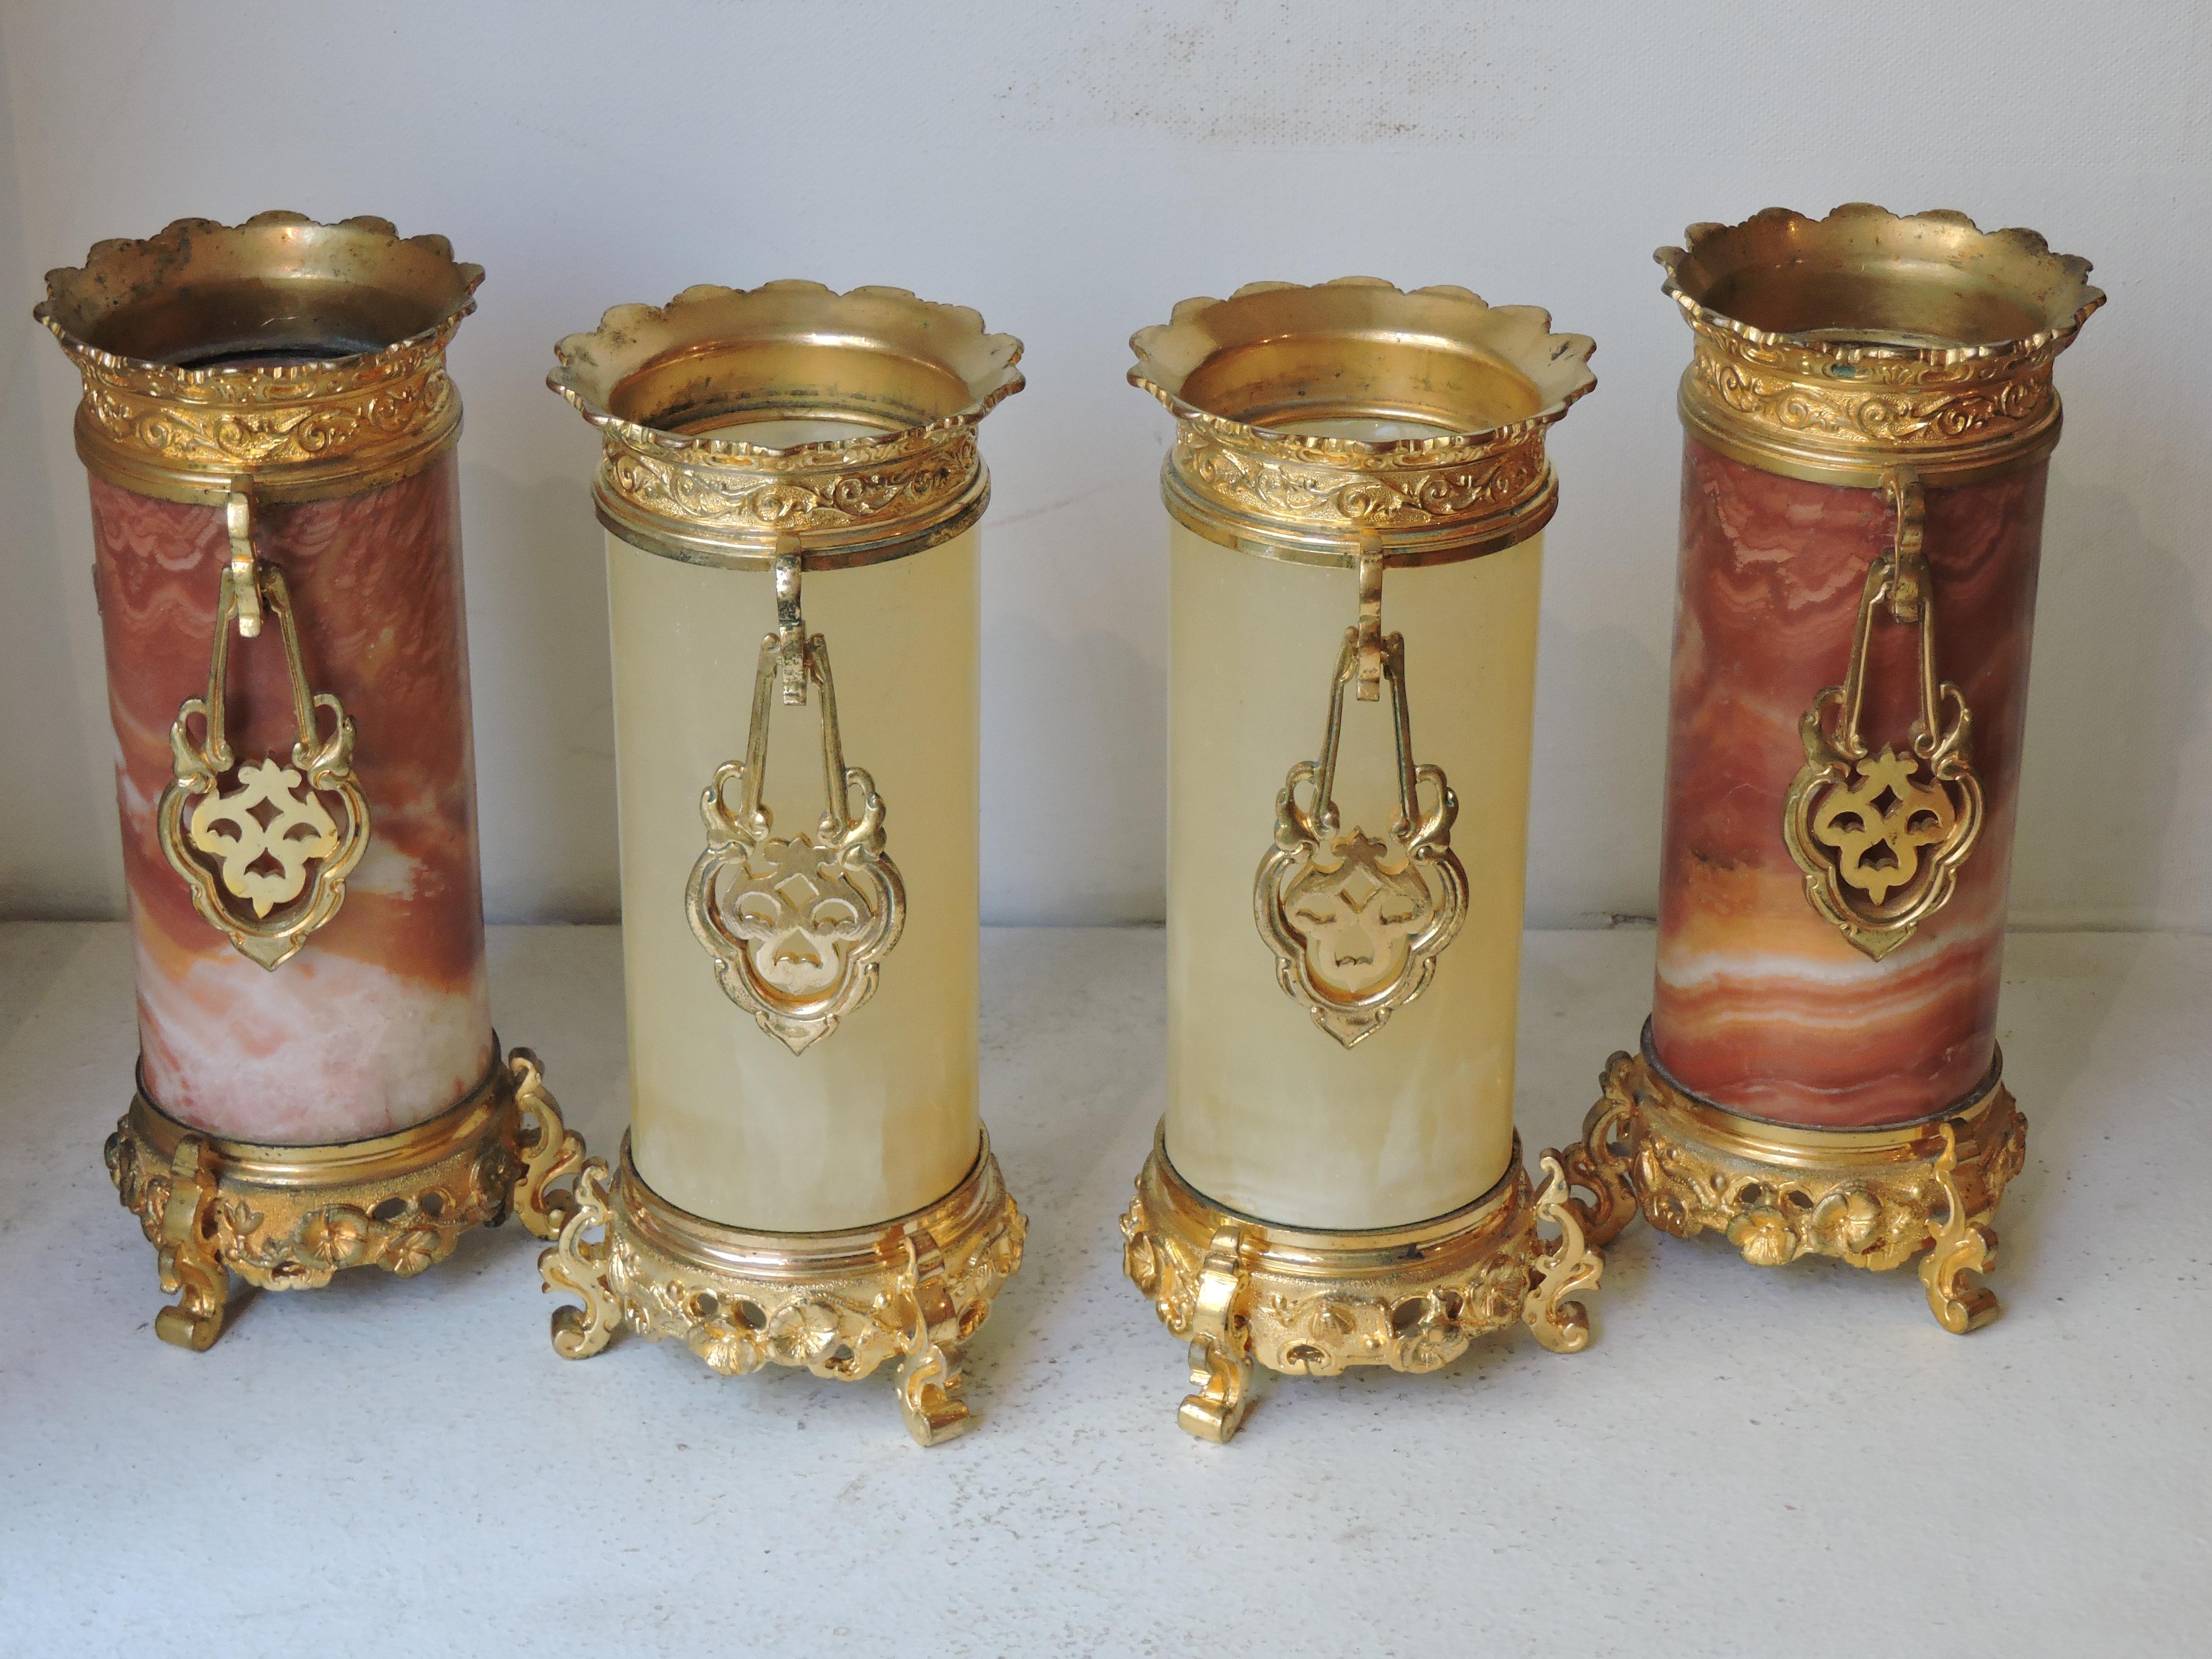 Late 19th Century Set of 4 Japonisme Marble, Onyx and Ormolu Vases in the Style of Edouard Lièvre